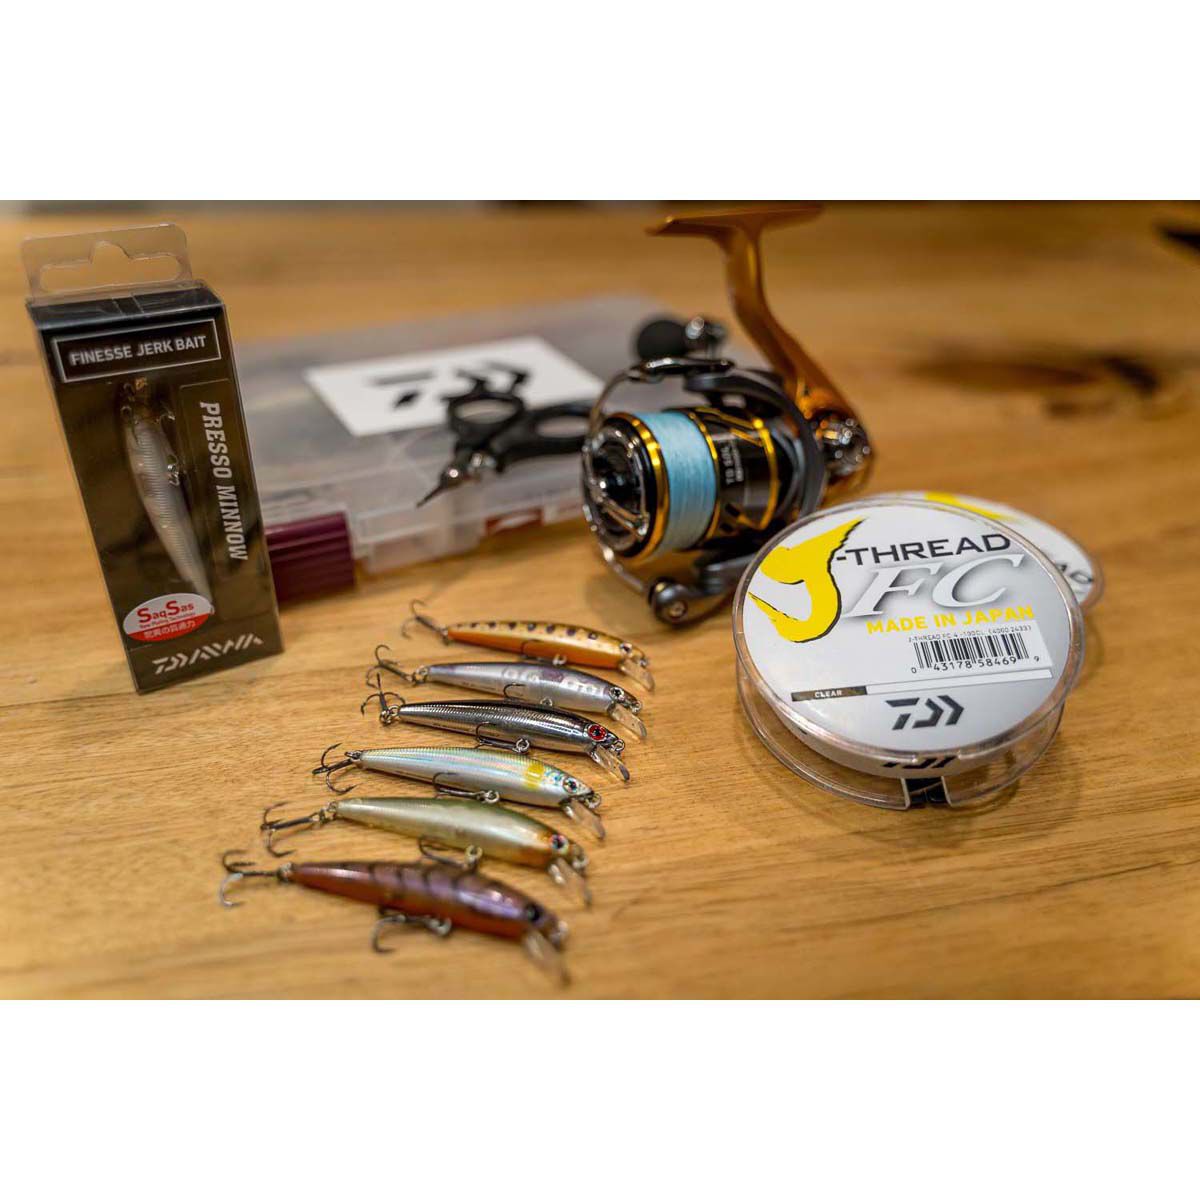 Daiwa Fluorocarbon Fishing Lines & Leaders for sale